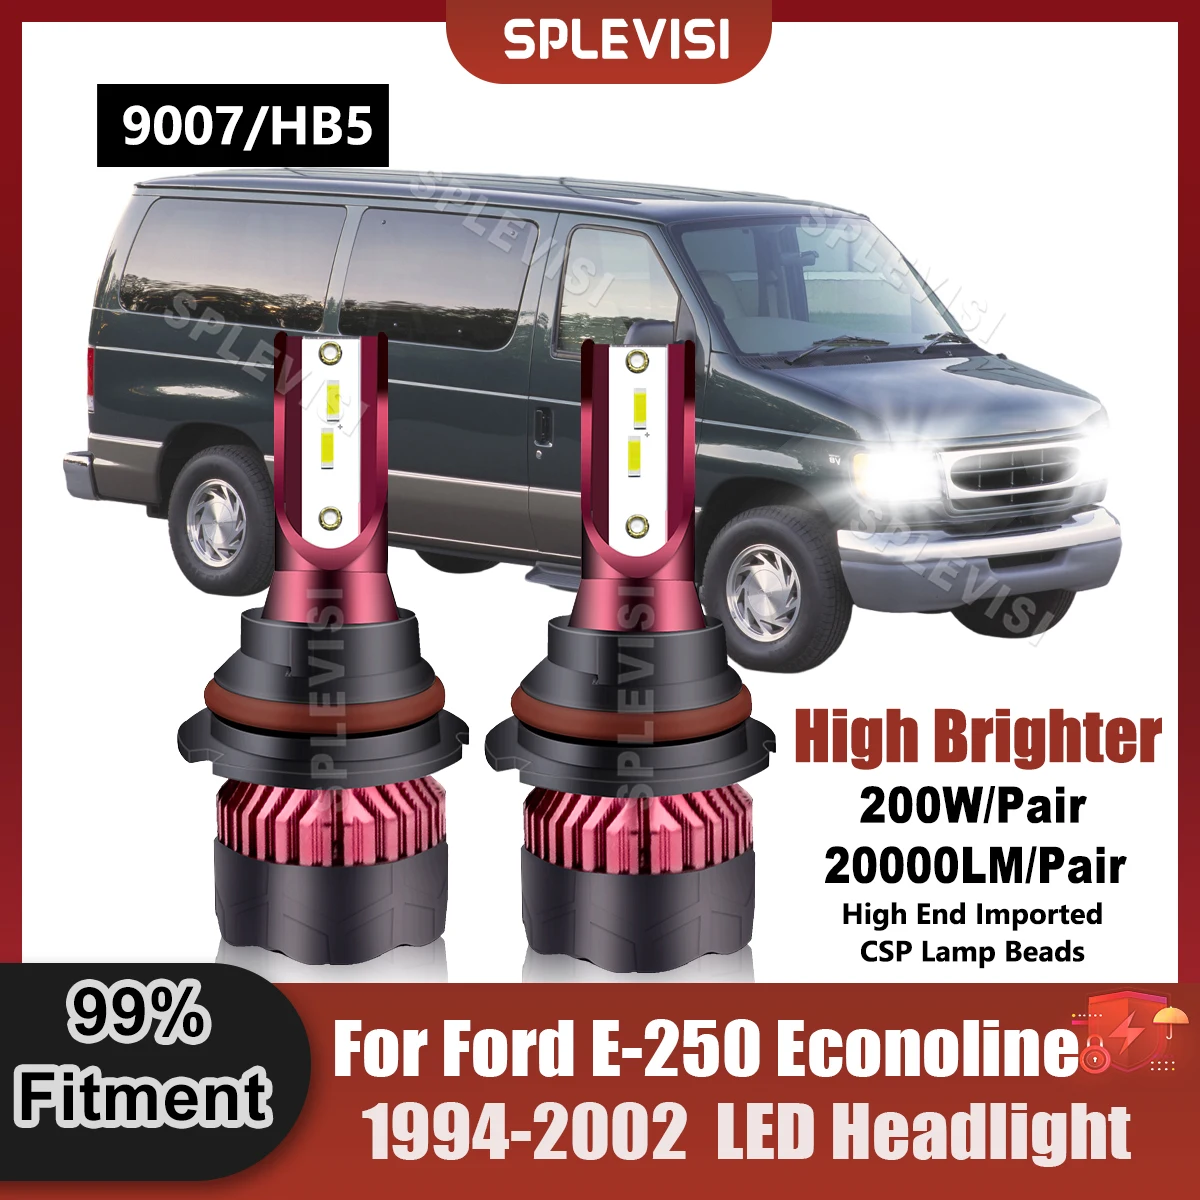 SPLEVISI 9007/HB5 LED Headlight Bulbs For Ford E-250 Econoline 1994 1995 1996 1997 1998 1999 2000 2001 2002 Replace Car Lamp 12x csp chips led headlight bulbs 9007 hb5 for ford e 350 econoline club wagon 1994 1995 1996 1997 1998 1999 2000 2001 2002